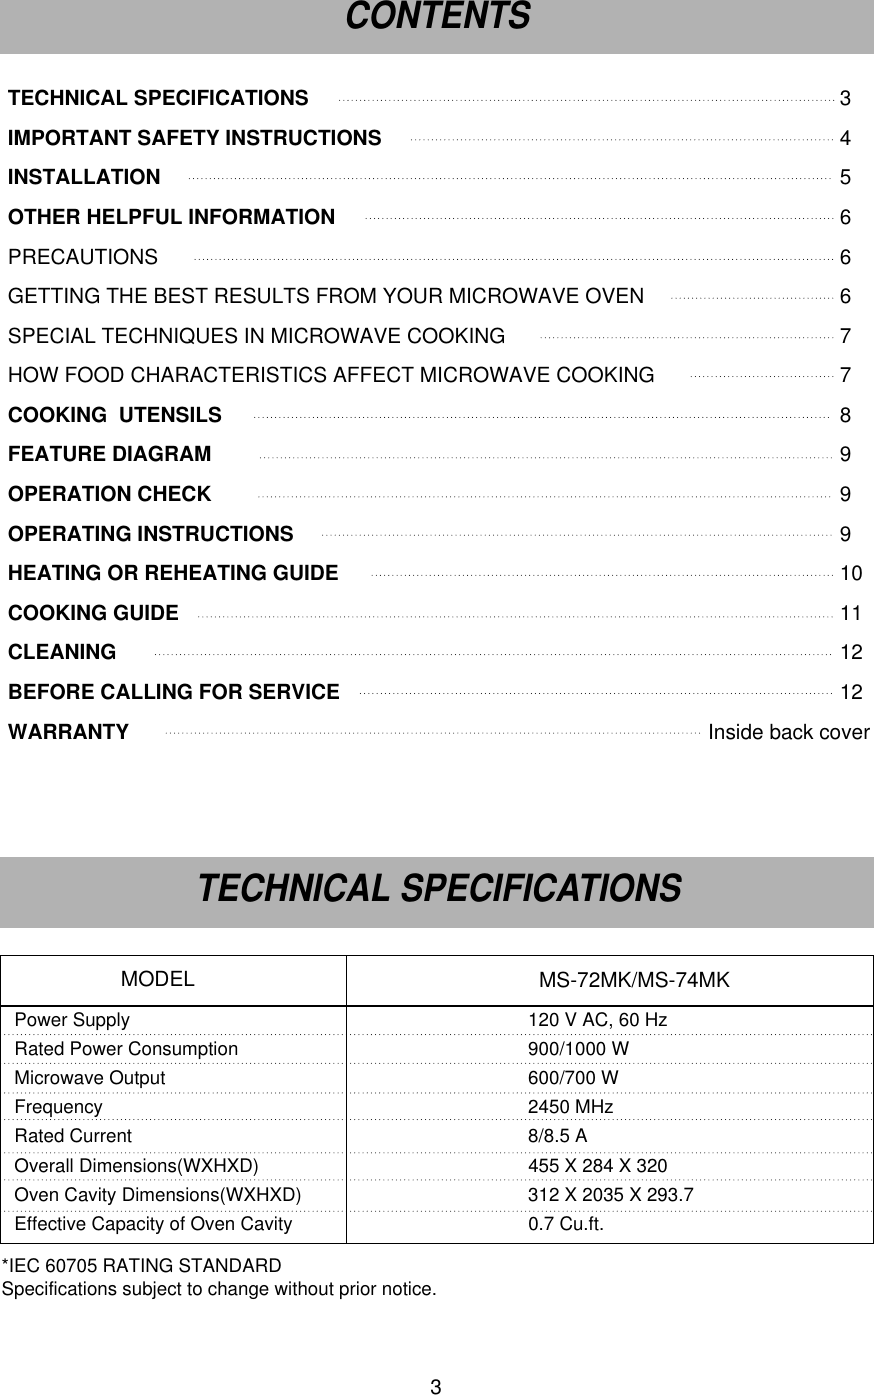 3TECHNICAL SPECIFICATIONS 3IMPORTANT SAFETY INSTRUCTIONS 4INSTALLATION 5OTHER HELPFUL INFORMATION 6PRECAUTIONS 6GETTING THE BEST RESULTS FROM YOUR MICROWAVE OVEN 6SPECIAL TECHNIQUES IN MICROWAVE COOKING 7 HOW FOOD CHARACTERISTICS AFFECT MICROWAVE COOKING 7COOKING  UTENSILS 8FEATURE DIAGRAM  9OPERATION CHECK   9OPERATING INSTRUCTIONS 9HEATING OR REHEATING GUIDE 10COOKING GUIDE 11CLEANING 12BEFORE CALLING FOR SERVICE 12WARRANTY                                                                                                    Inside back coverPower Supply 120 V AC, 60 HzRated Power Consumption 900/1000 WMicrowave Output 600/700 WFrequency 2450 MHzRated Current 8/8.5 AOverall Dimensions(WXHXD) 455 X 284 X 320 Oven Cavity Dimensions(WXHXD) 312 X 2035 X 293.7Effective Capacity of Oven Cavity 0.7 Cu.ft.MS-72MK/MS-74MKMODELCONTENTSTECHNICAL SPECIFICATIONS*IEC 60705 RATING STANDARD Specifications subject to change without prior notice.